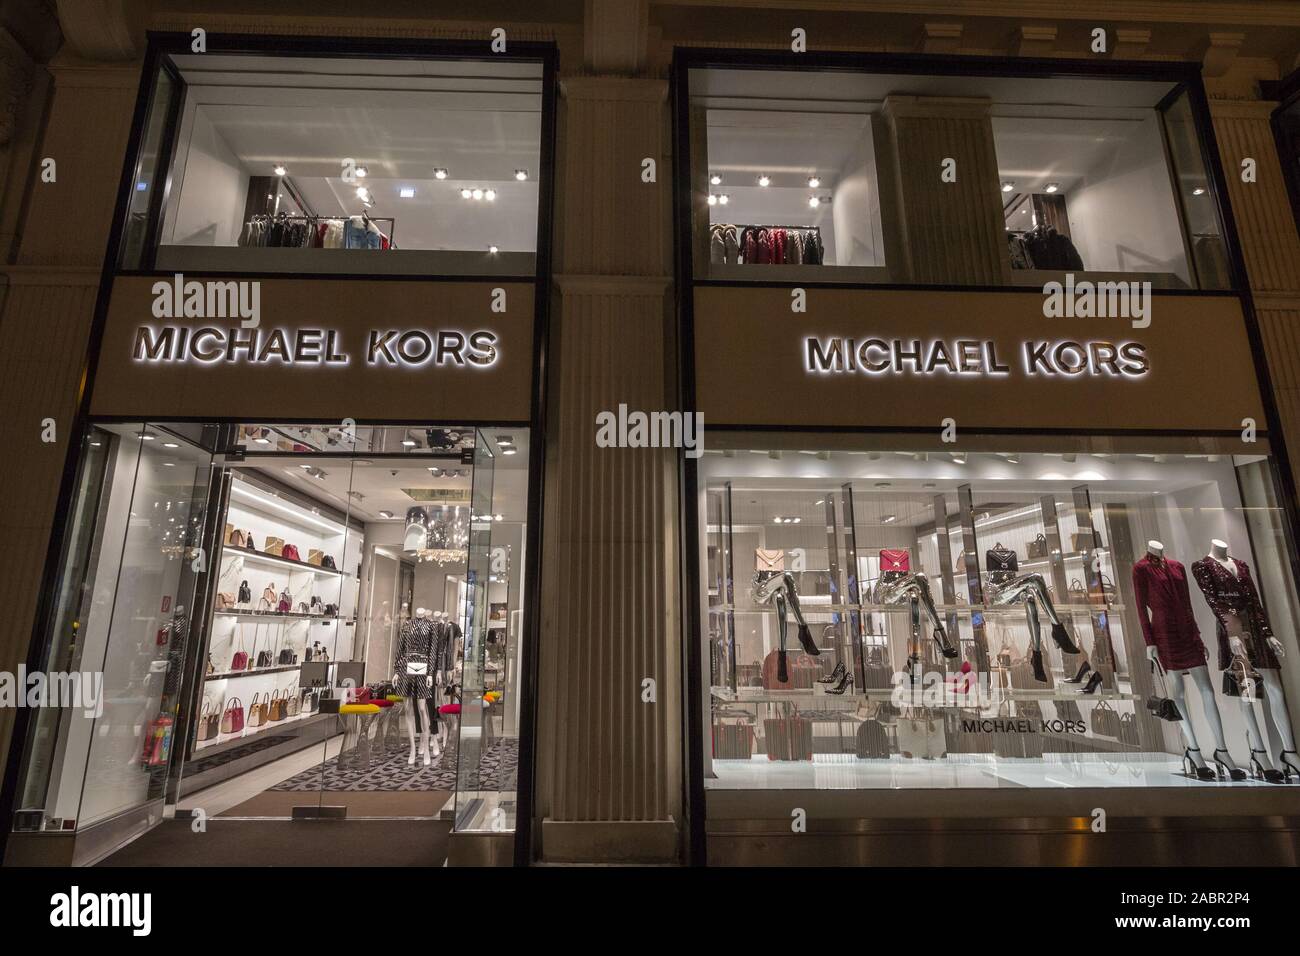 VIENNA, AUSTRIA - NOVEMBER 6, 2019: Michael Kors logo in front of their boutique for Vienna. Michael Kors is an American luxury fashion designer & man Stock Photo